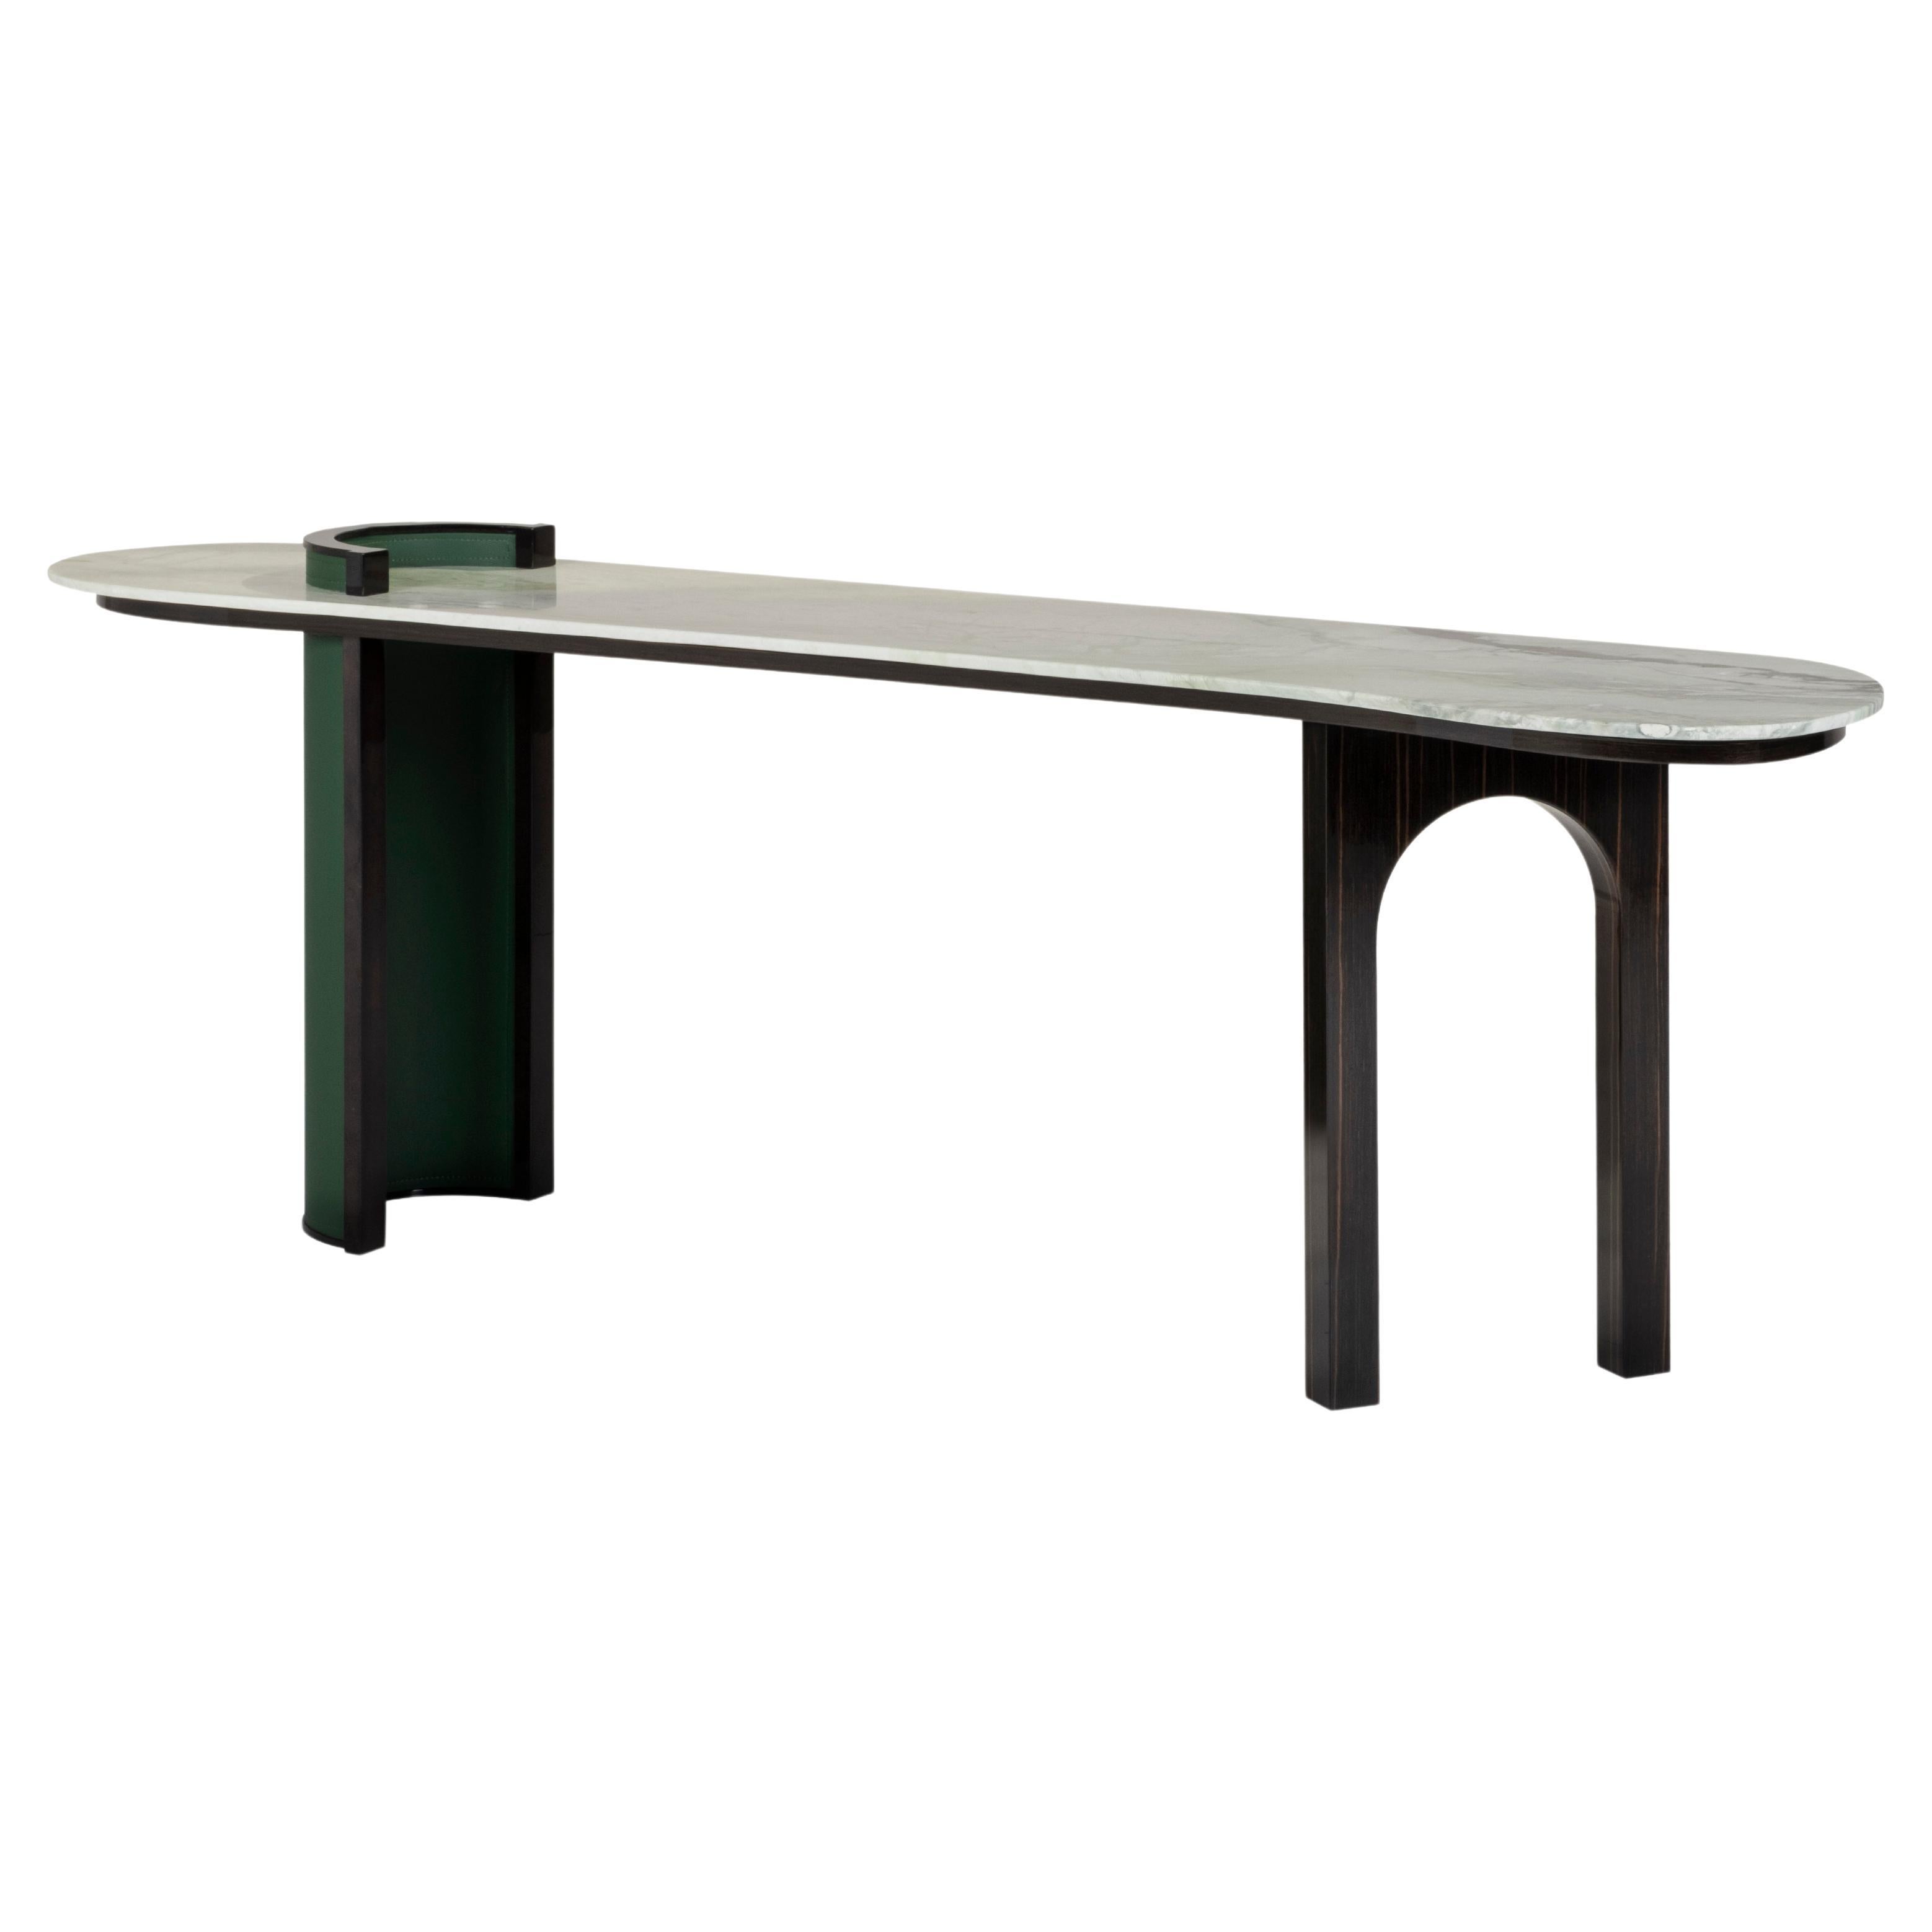 Modern Chiado Console Table, Marble, Leather, Handmade in Portugal by Greenapple